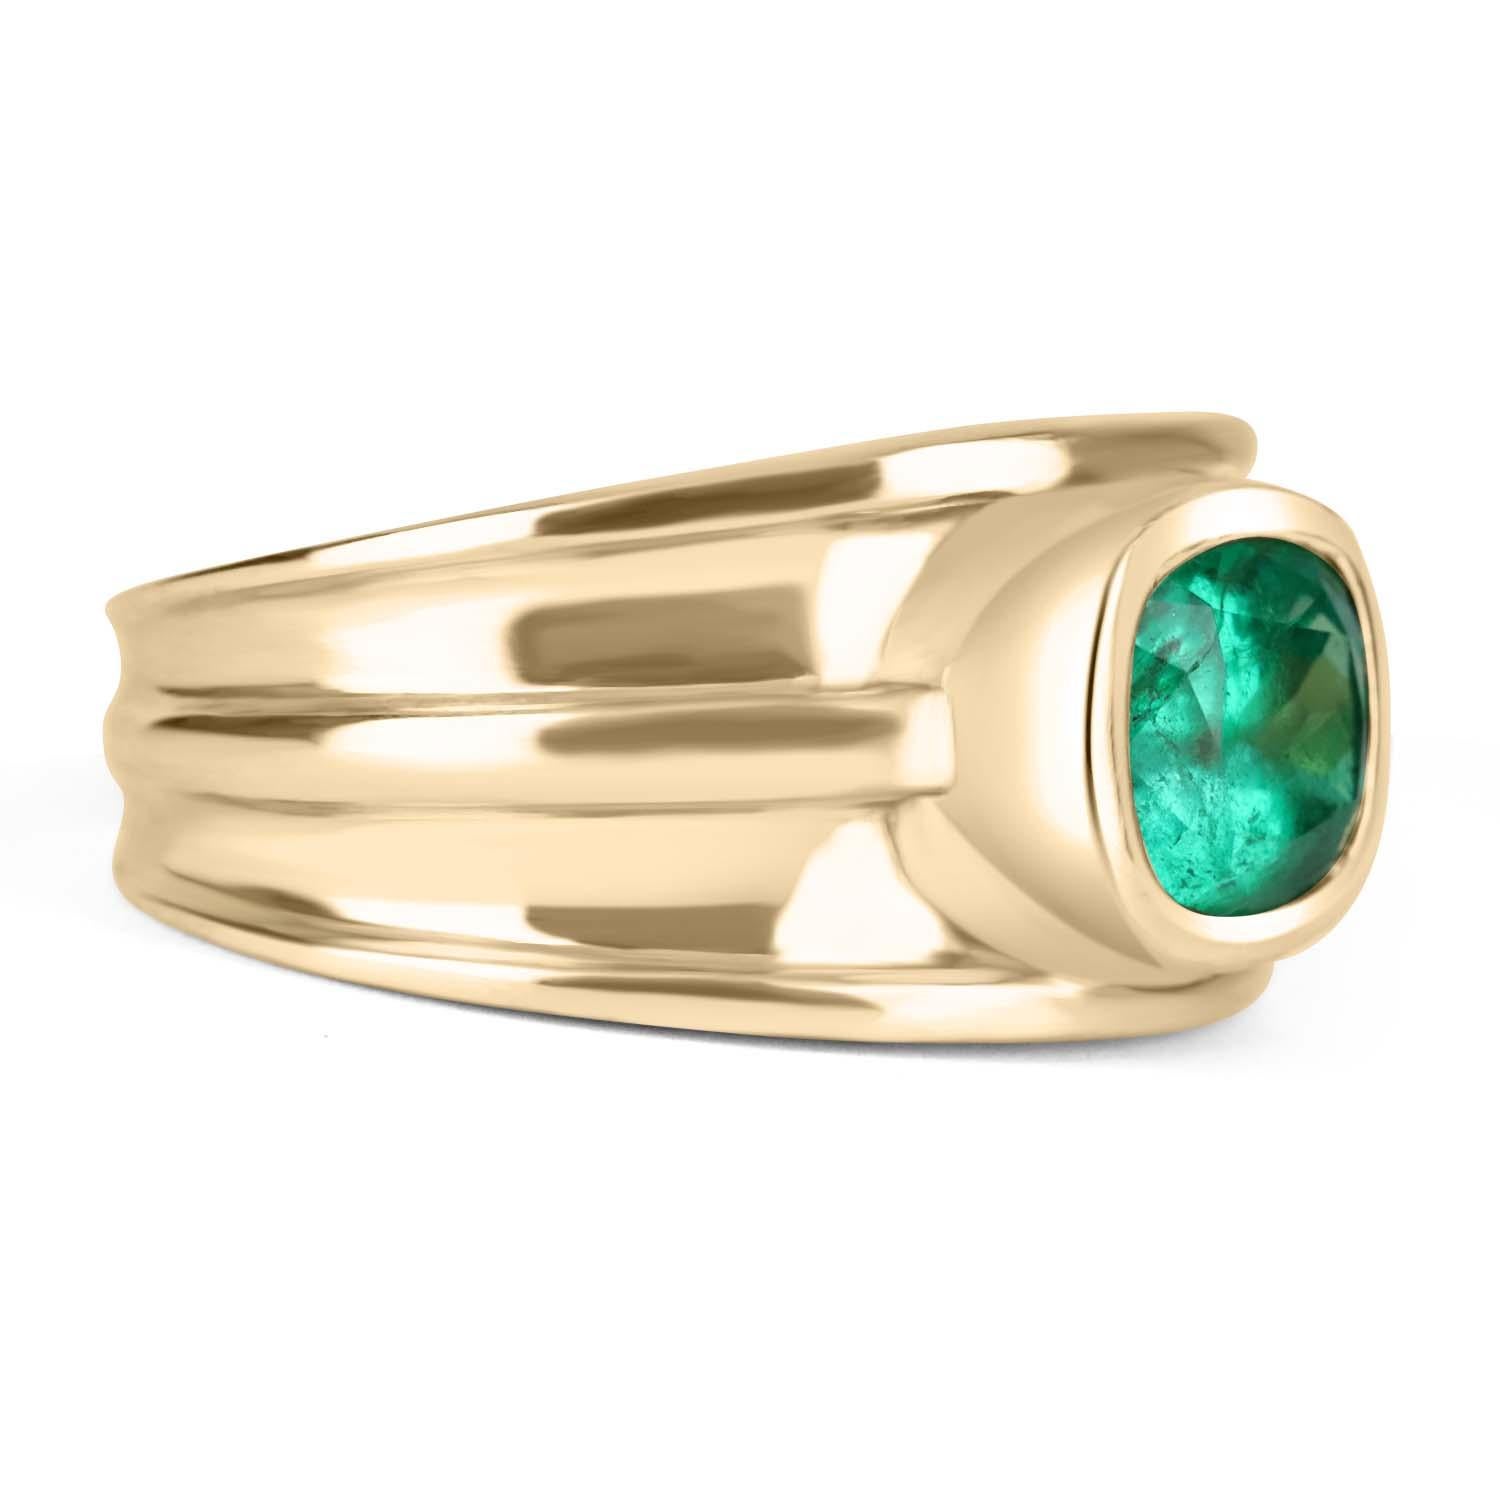 Displayed is a stunning, East to West, Colombian emerald cushion men's ring in 18K yellow gold. This solitaire ring carries a 2.05-carat emerald in a bezel setting. Fully faceted, this gemstone showcases very good shine and beautiful, green color.